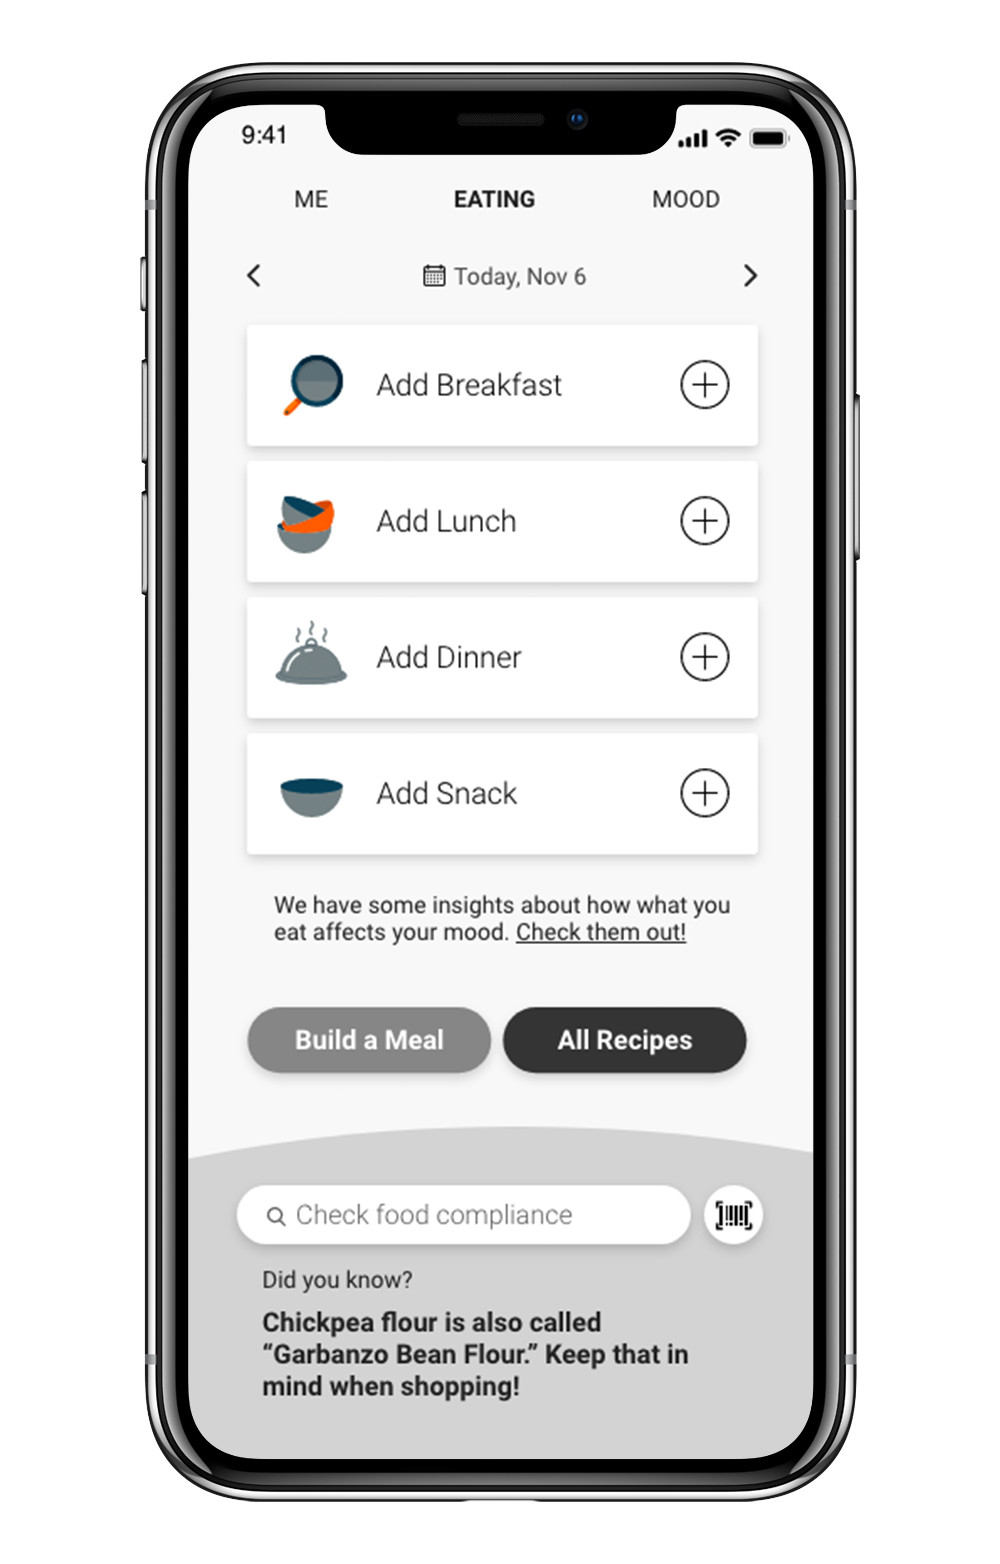 Homescreen of the app showing daily tracking for meals.